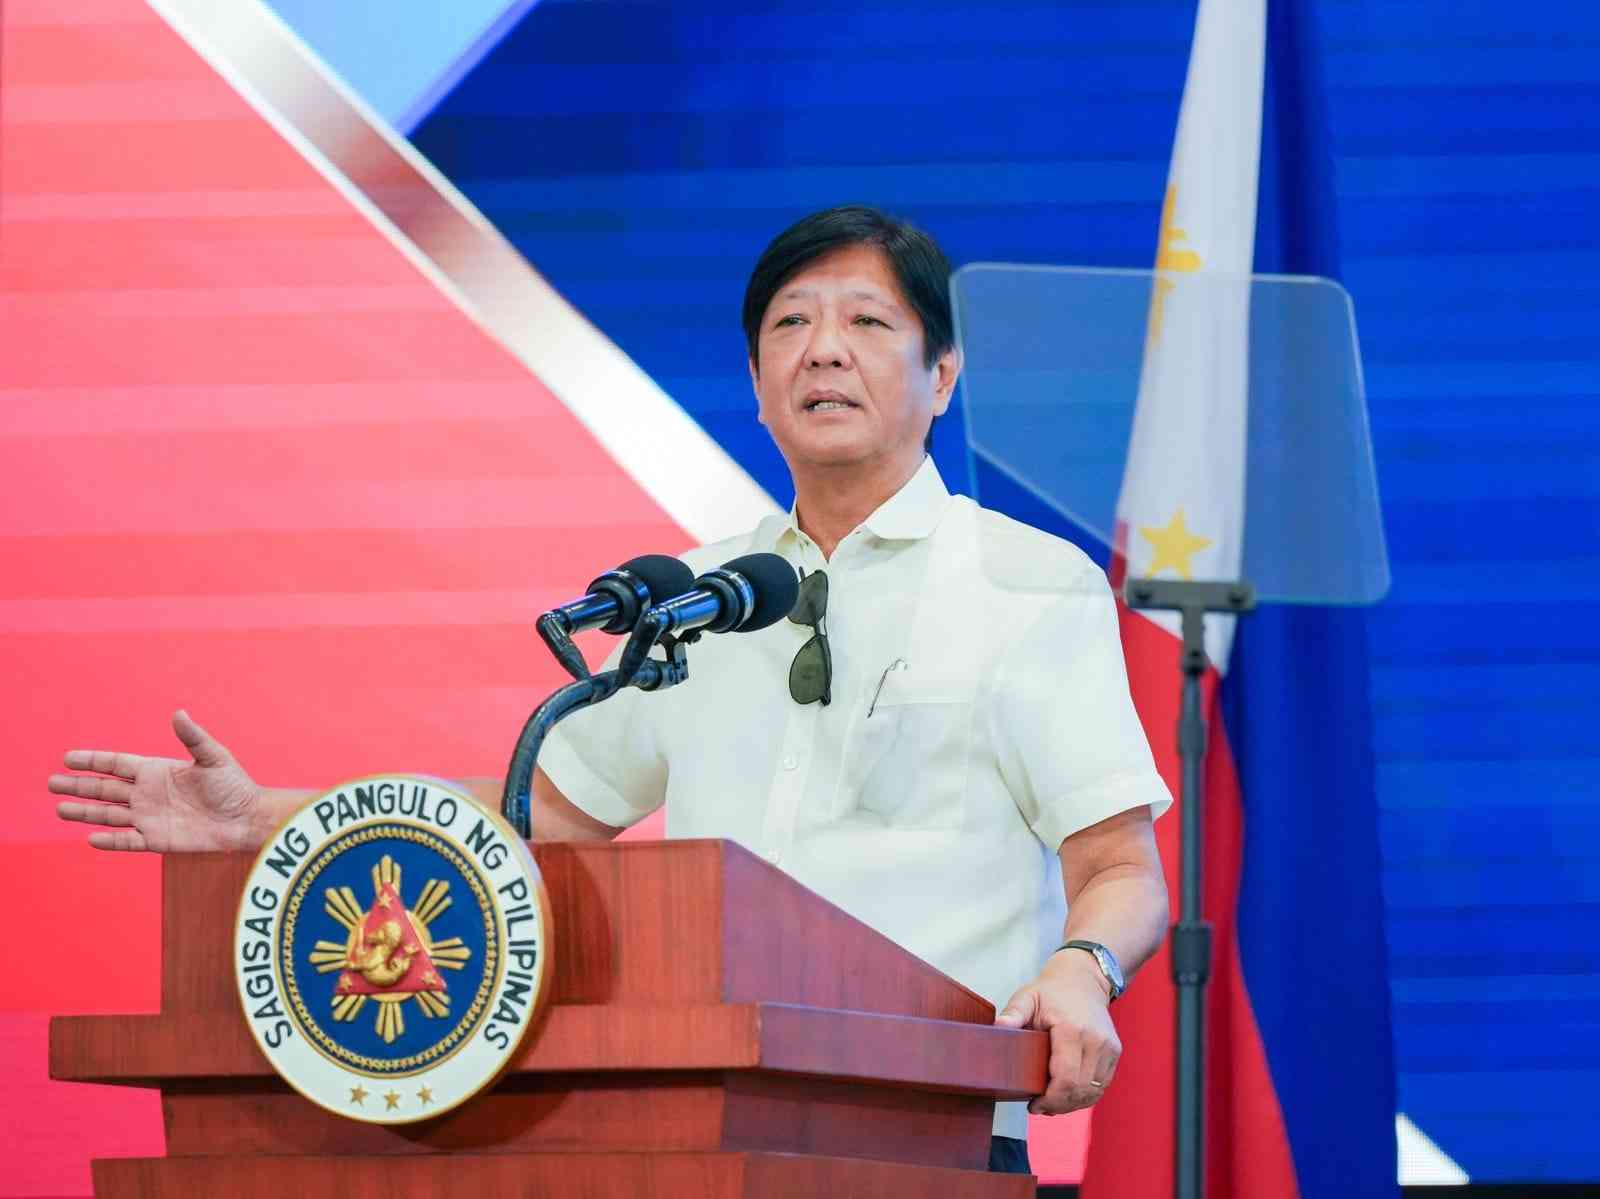 PBBM on 126th Independence Day: "True spirit of Freedom lives in every Filipino"